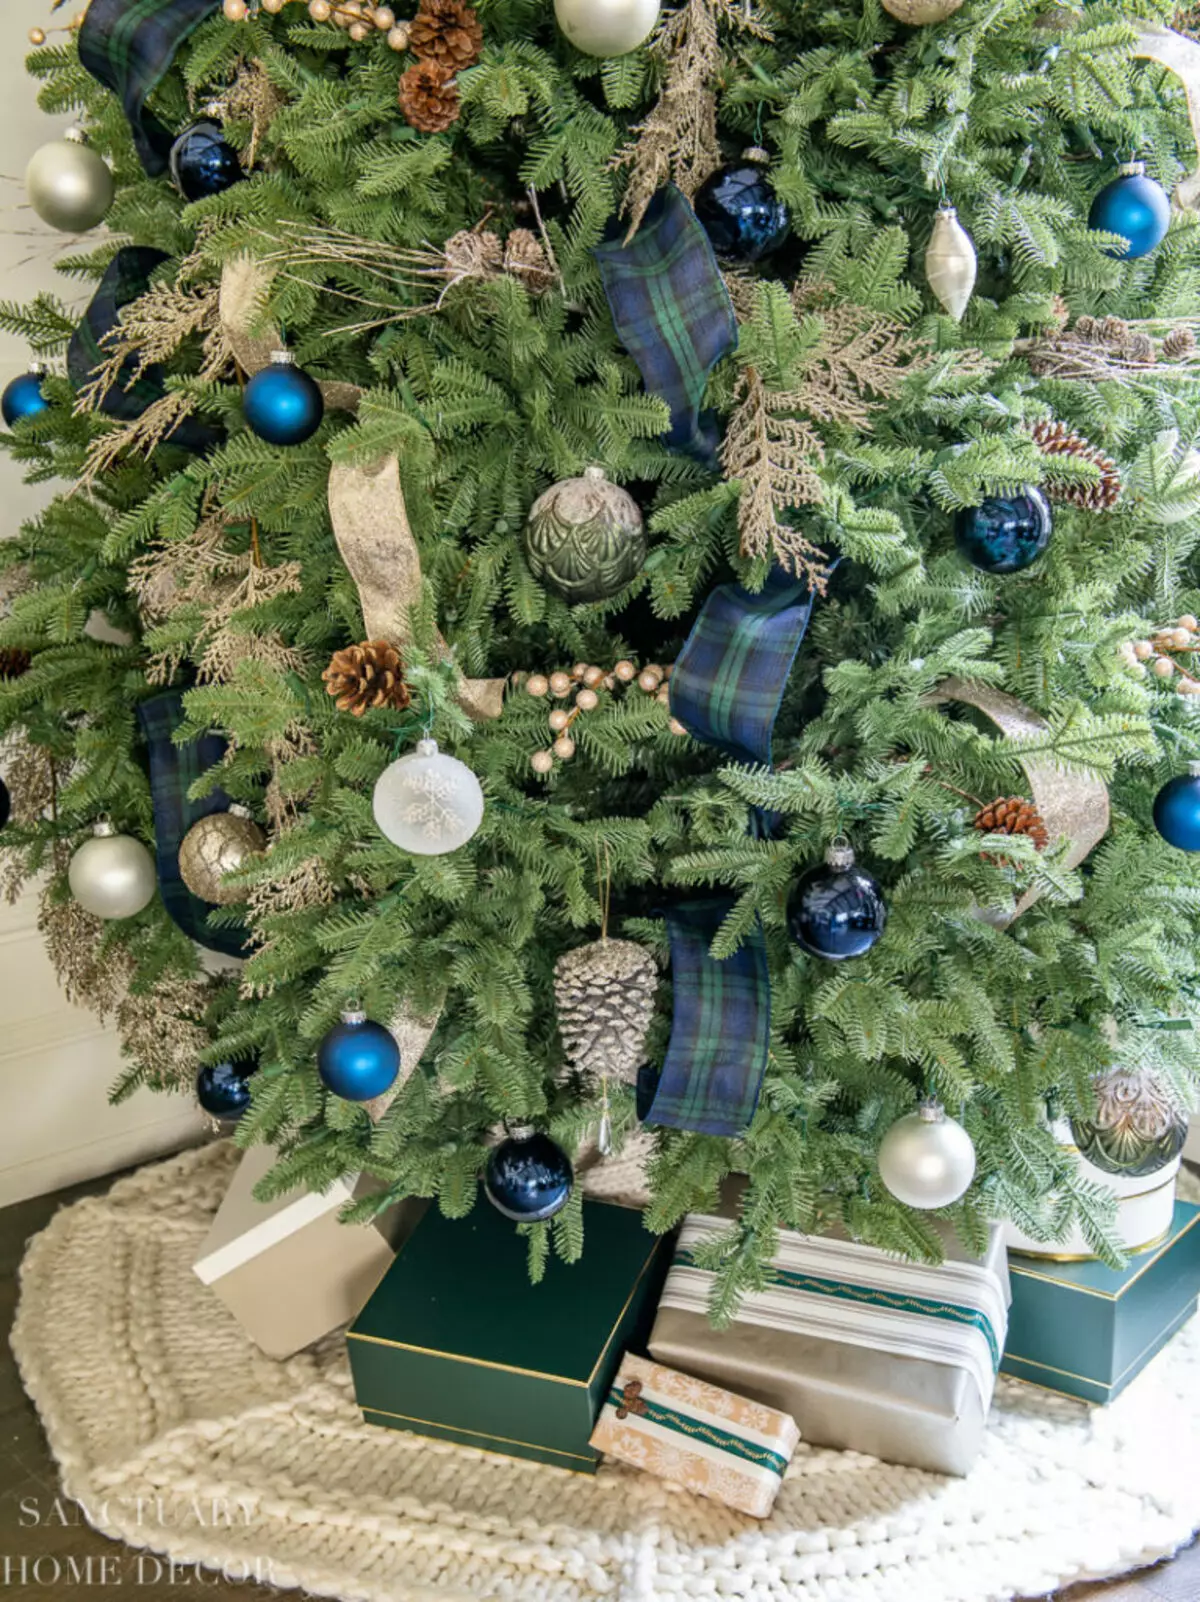 How to decorate the Christmas tree in blue-silver color? 30 photos How to dress up with balls and other decorations in blue and silver tones? 7627_16